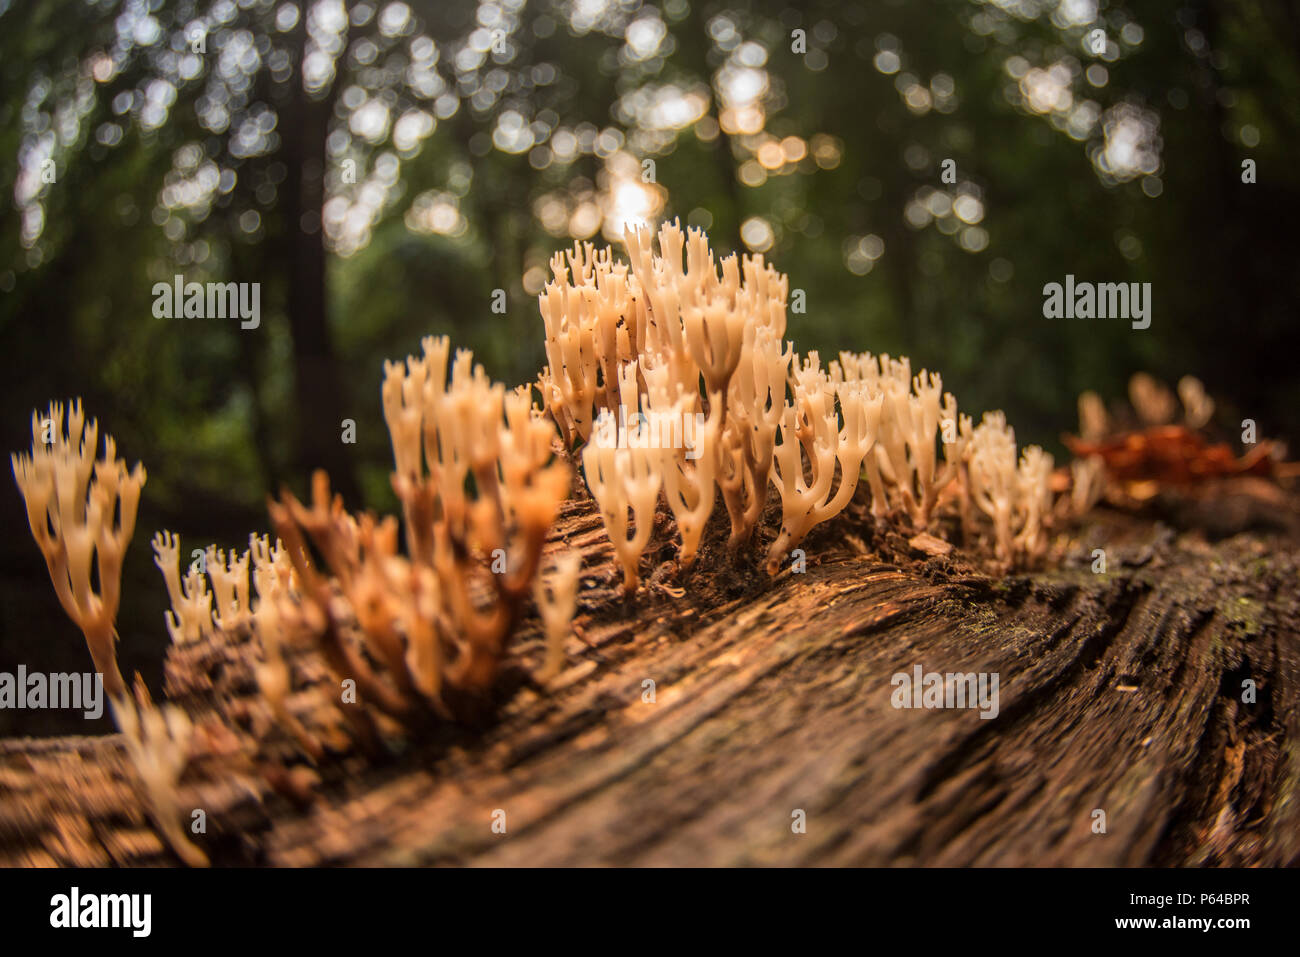 Coral fungi growing on a rotting log in eastern North Carolina, this type of fungus is considered a clavarioid fungi. Stock Photo